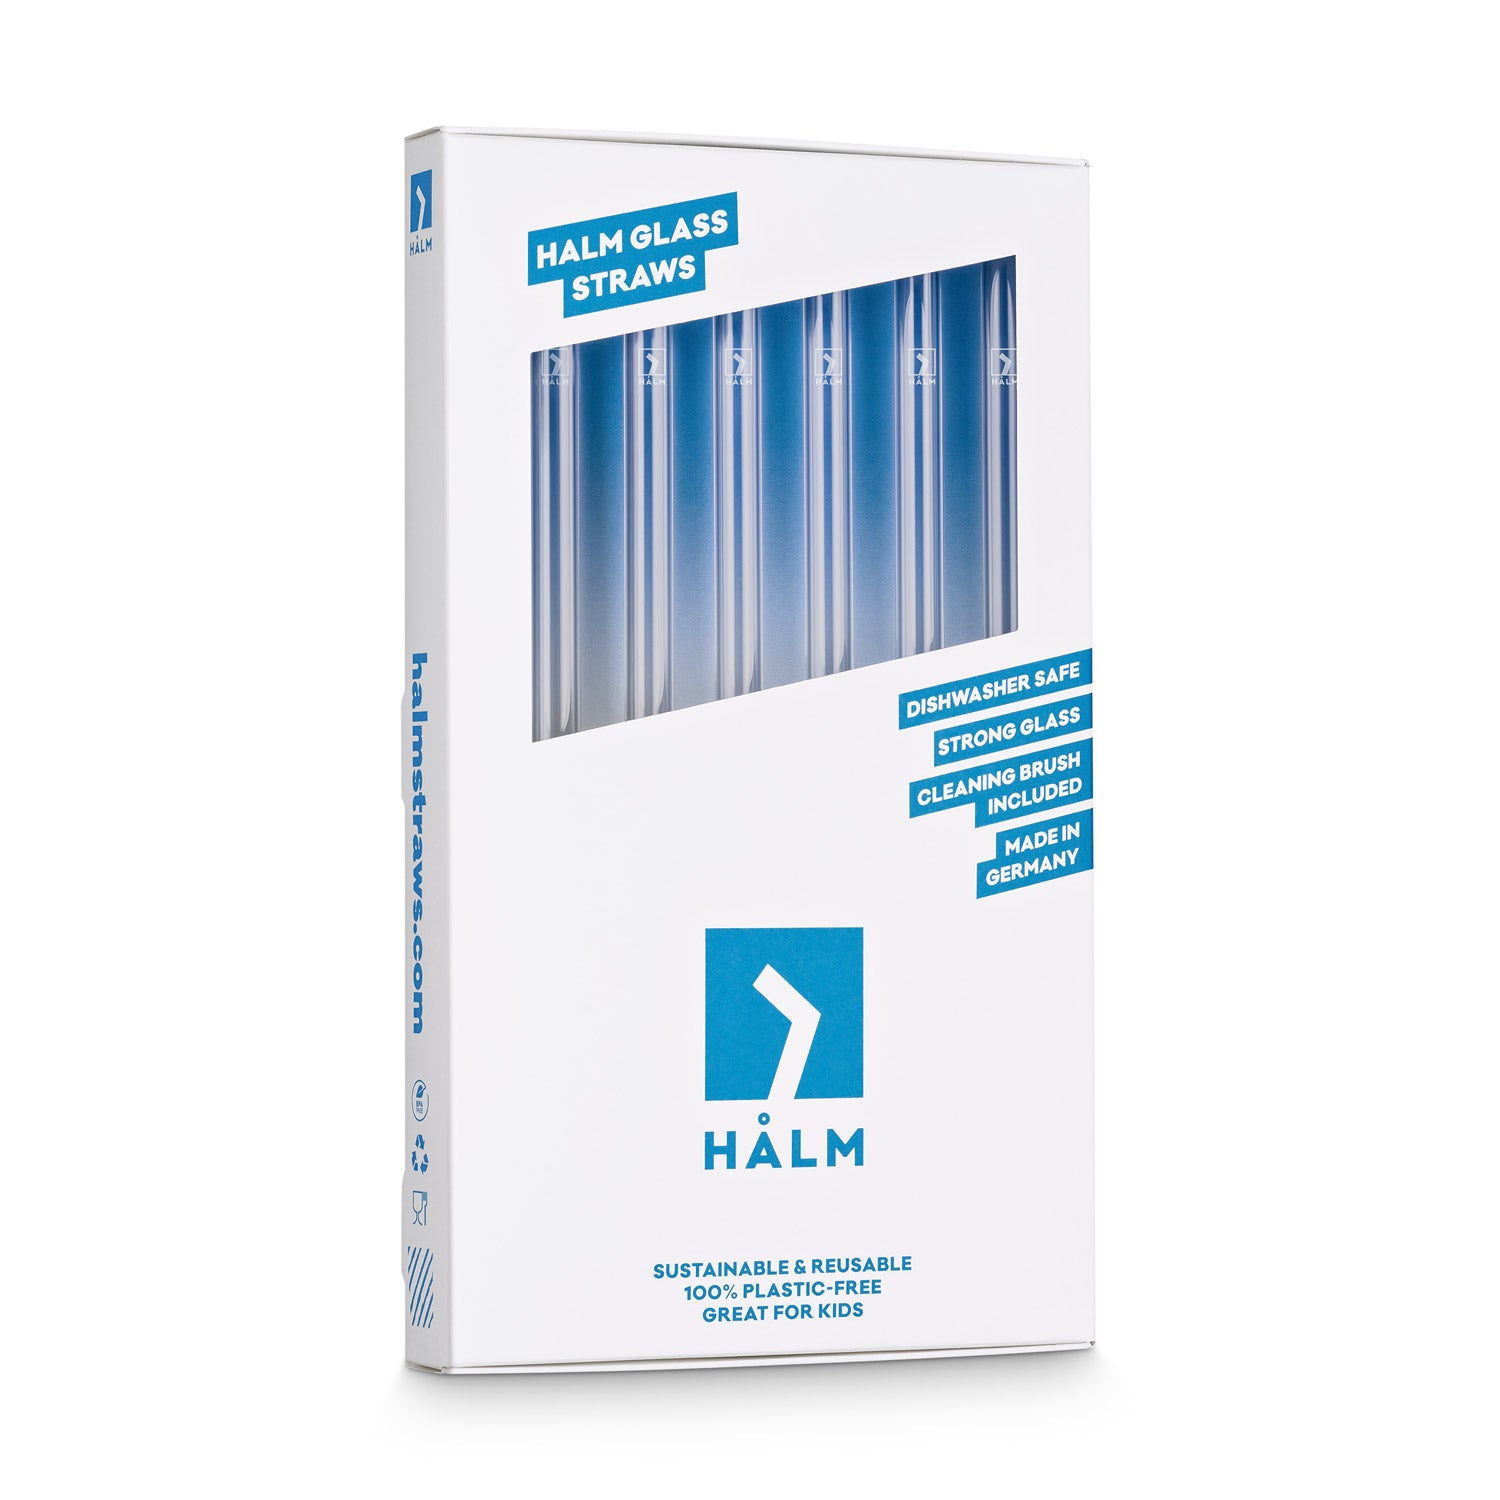 Halm Glass Straws - 6 Reusable Drinking Straws Plastic-Free Cleaning Brush - Made in Germany - Dishwasher Safe - Eco-Friendly - 23 cm 9 in x 09 cm